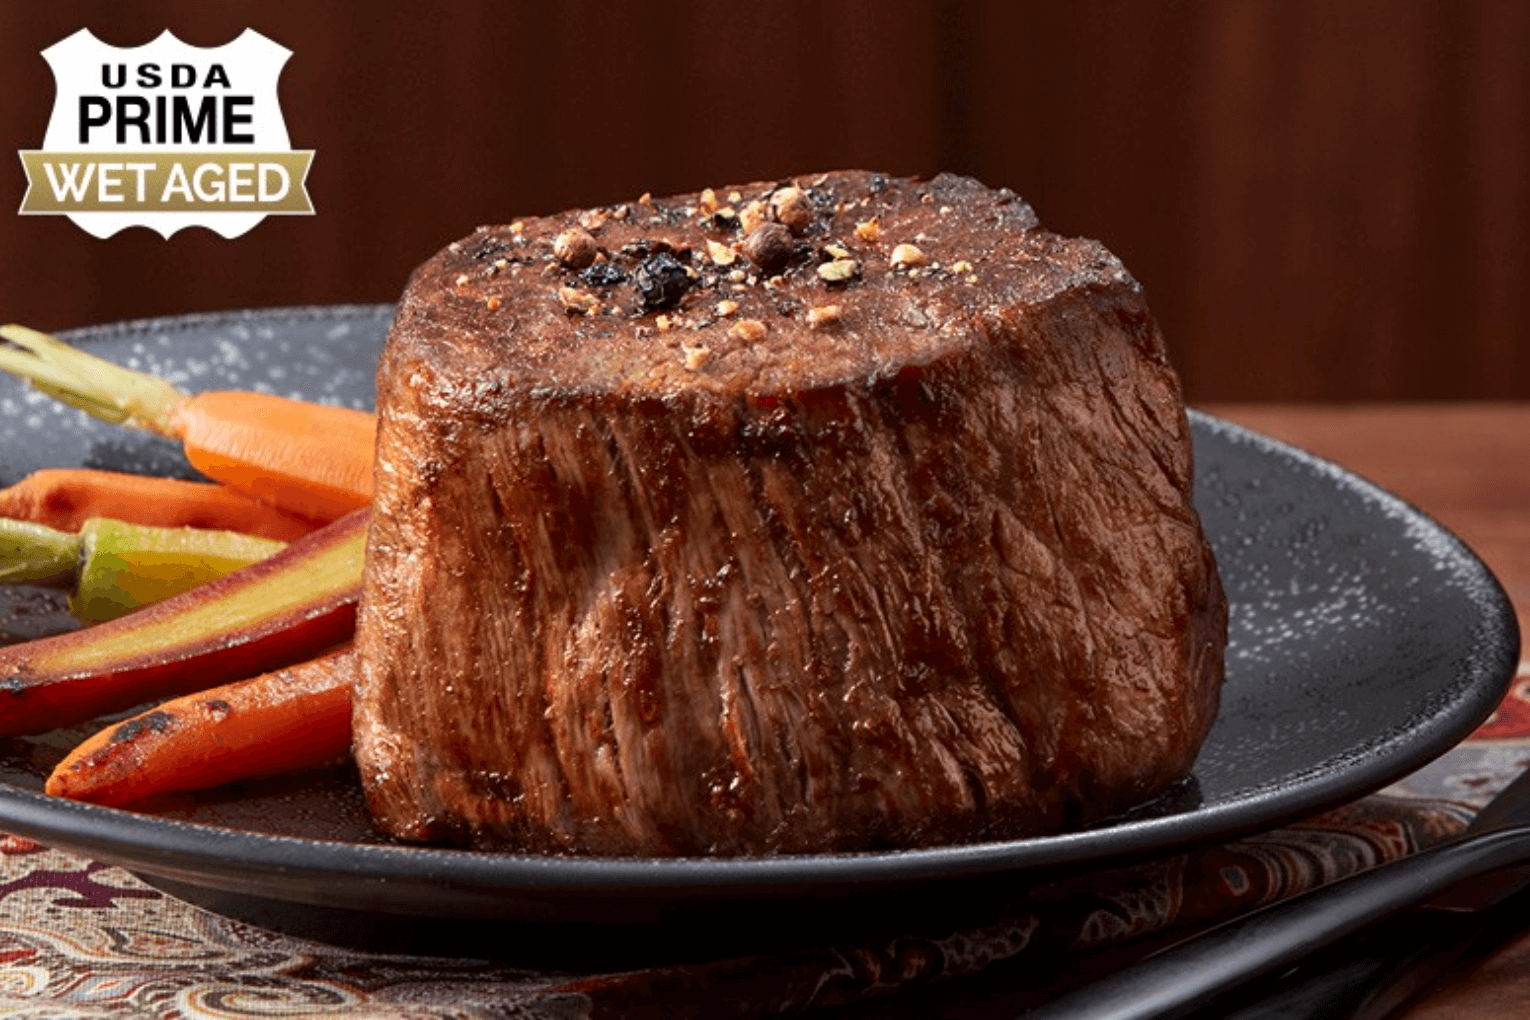 Wagyu Filet Mignon Beef Order Online Shipped by Mail.